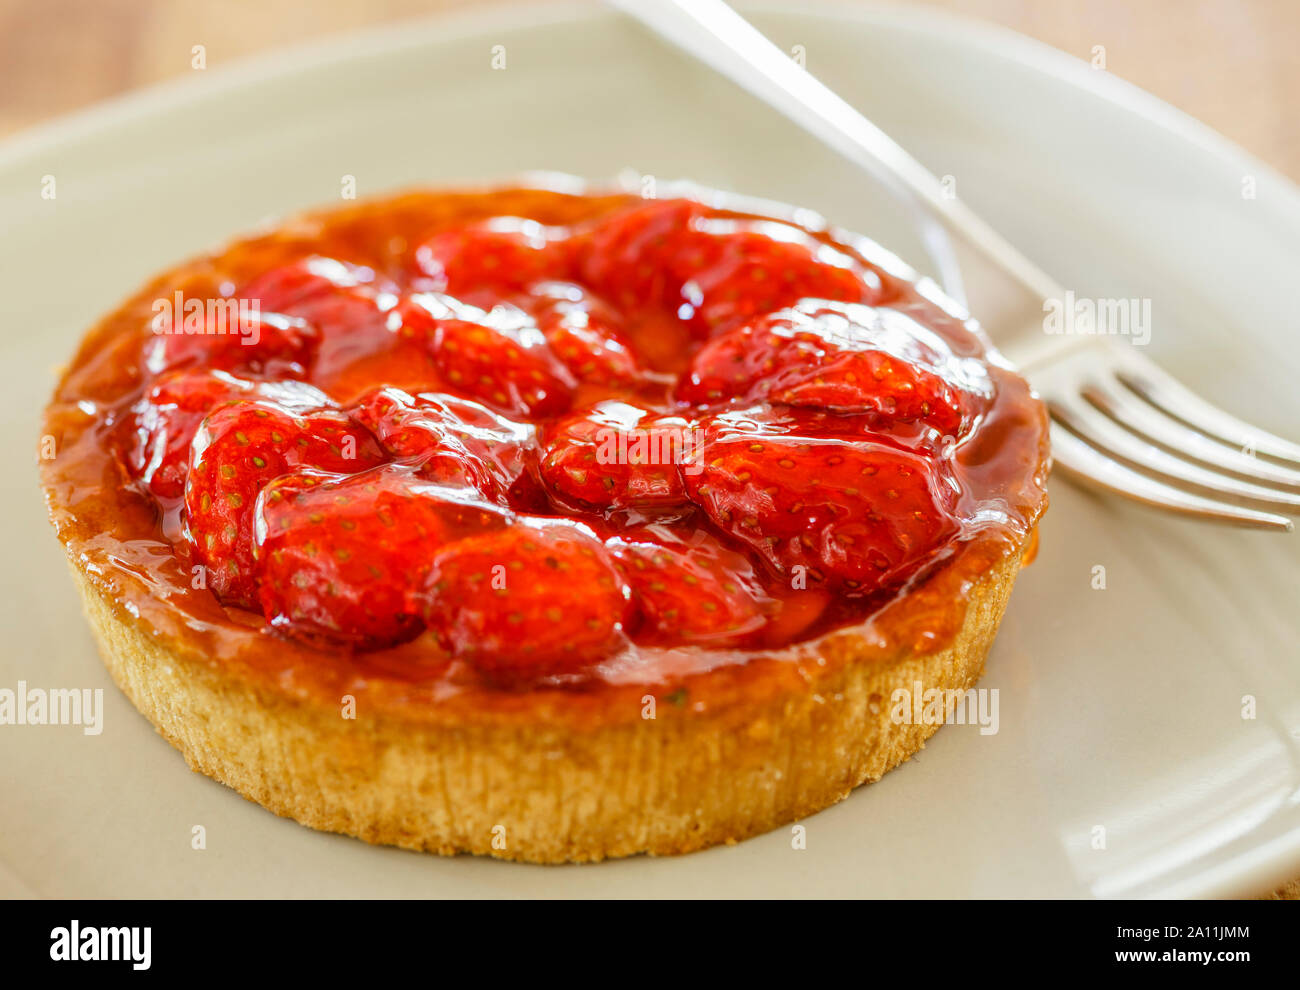 Strawberry tart on a plate with a fork Stock Photo